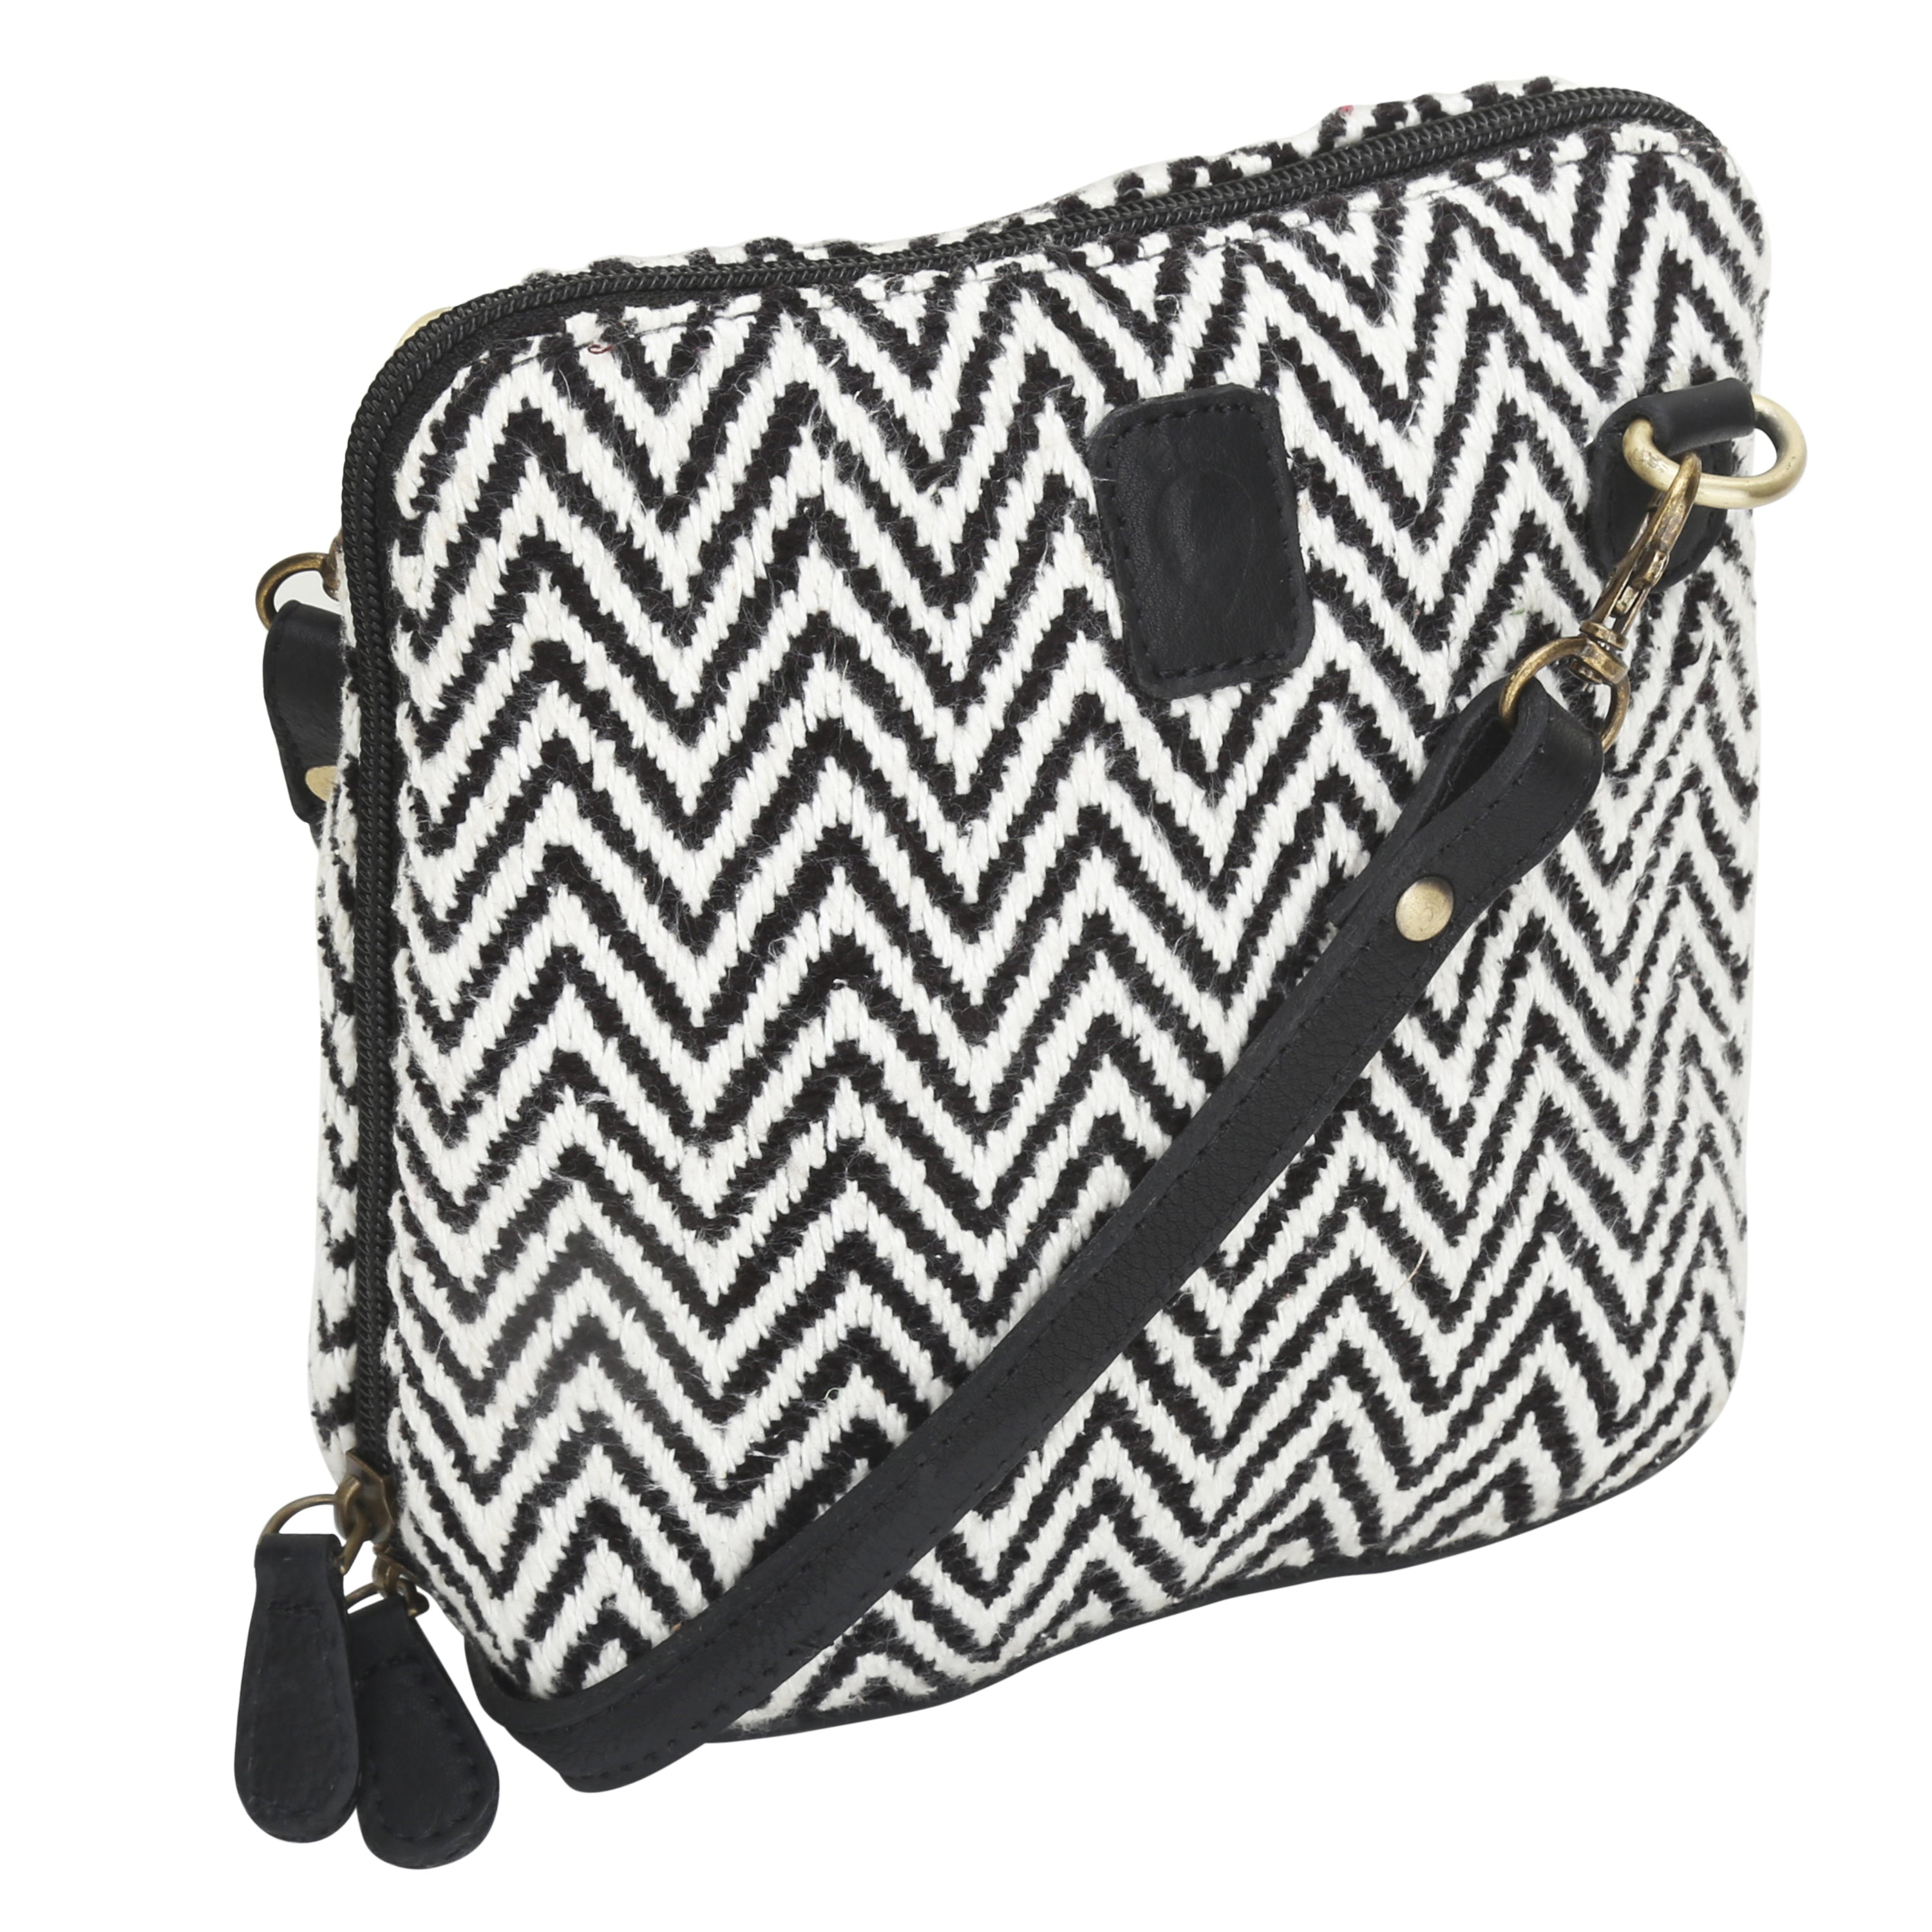 Woven Patterned Sling Bag | Black and White